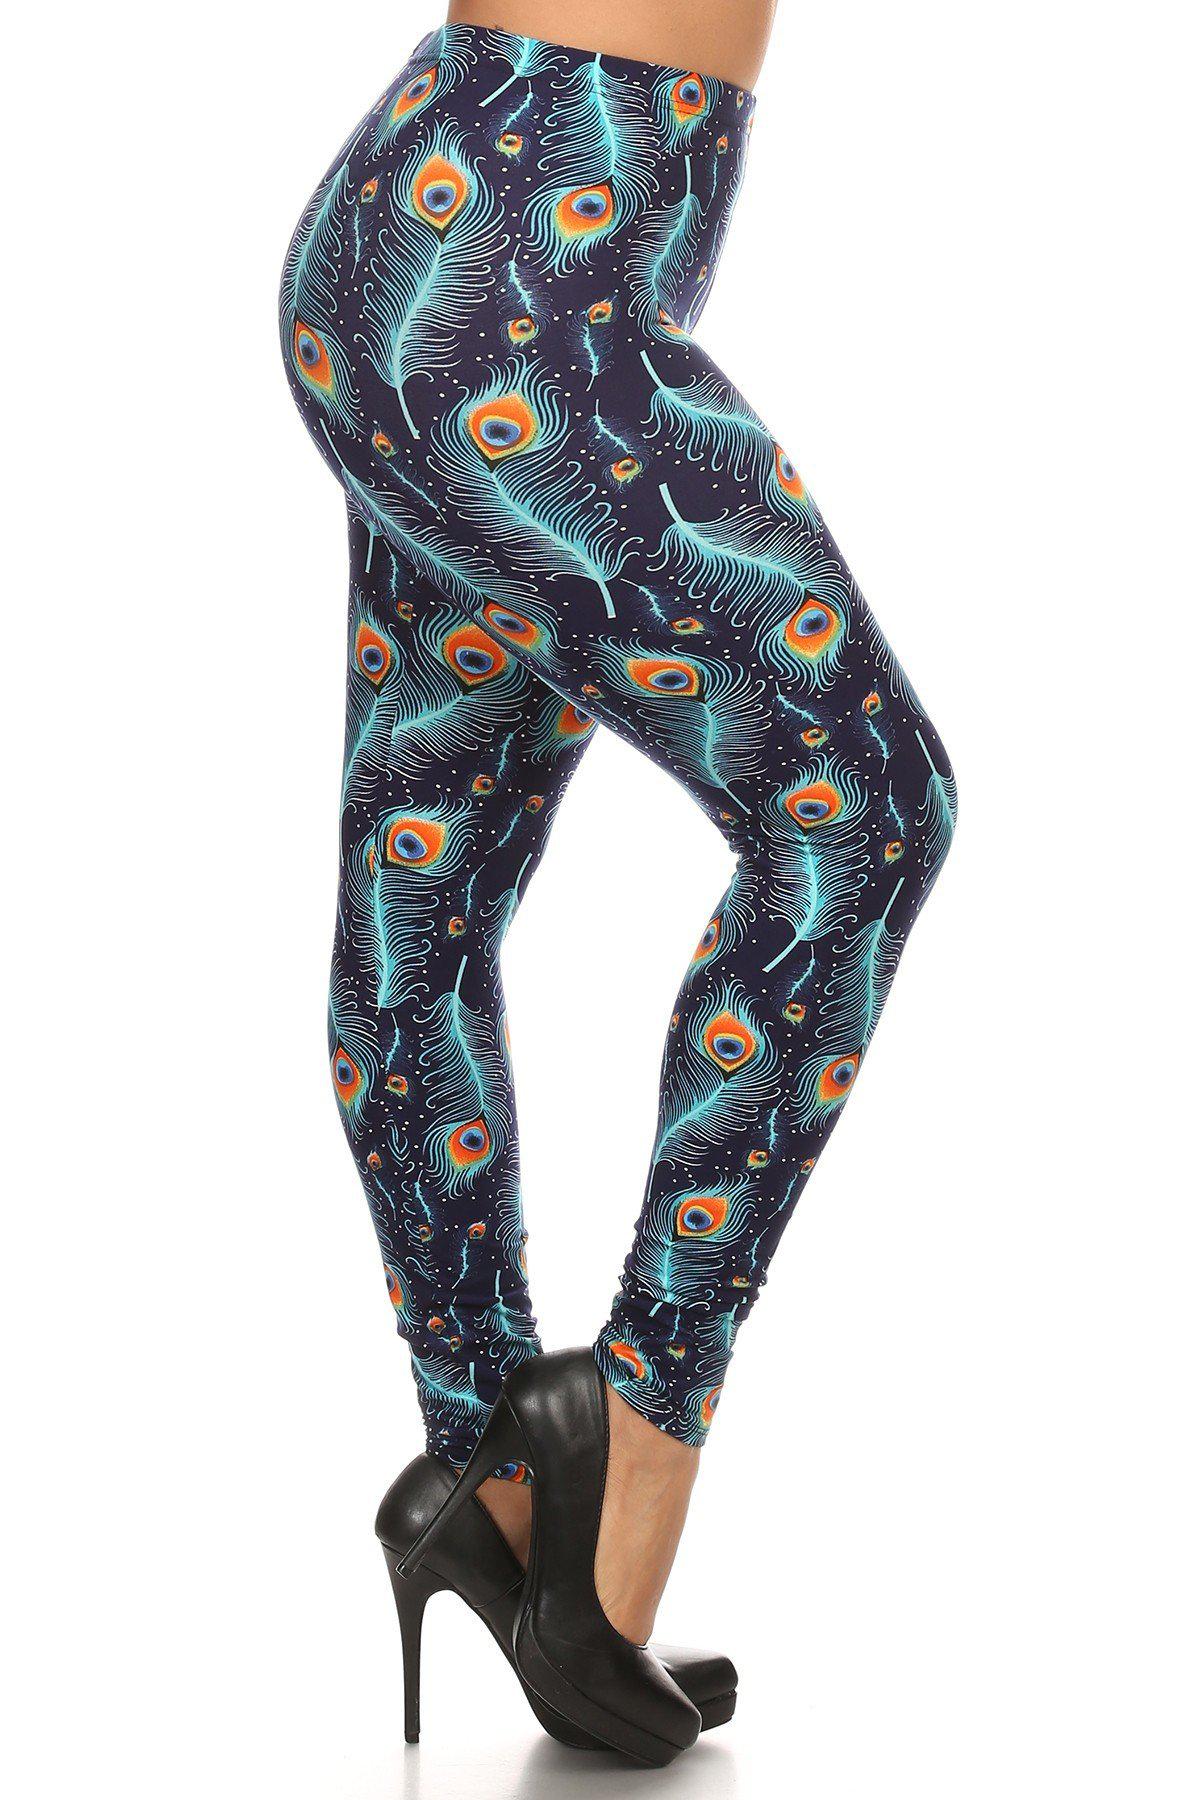 Plus Size Print, Full Length Leggings In A Slim Fitting Style With A Banded High Waist Blue Zone Planet